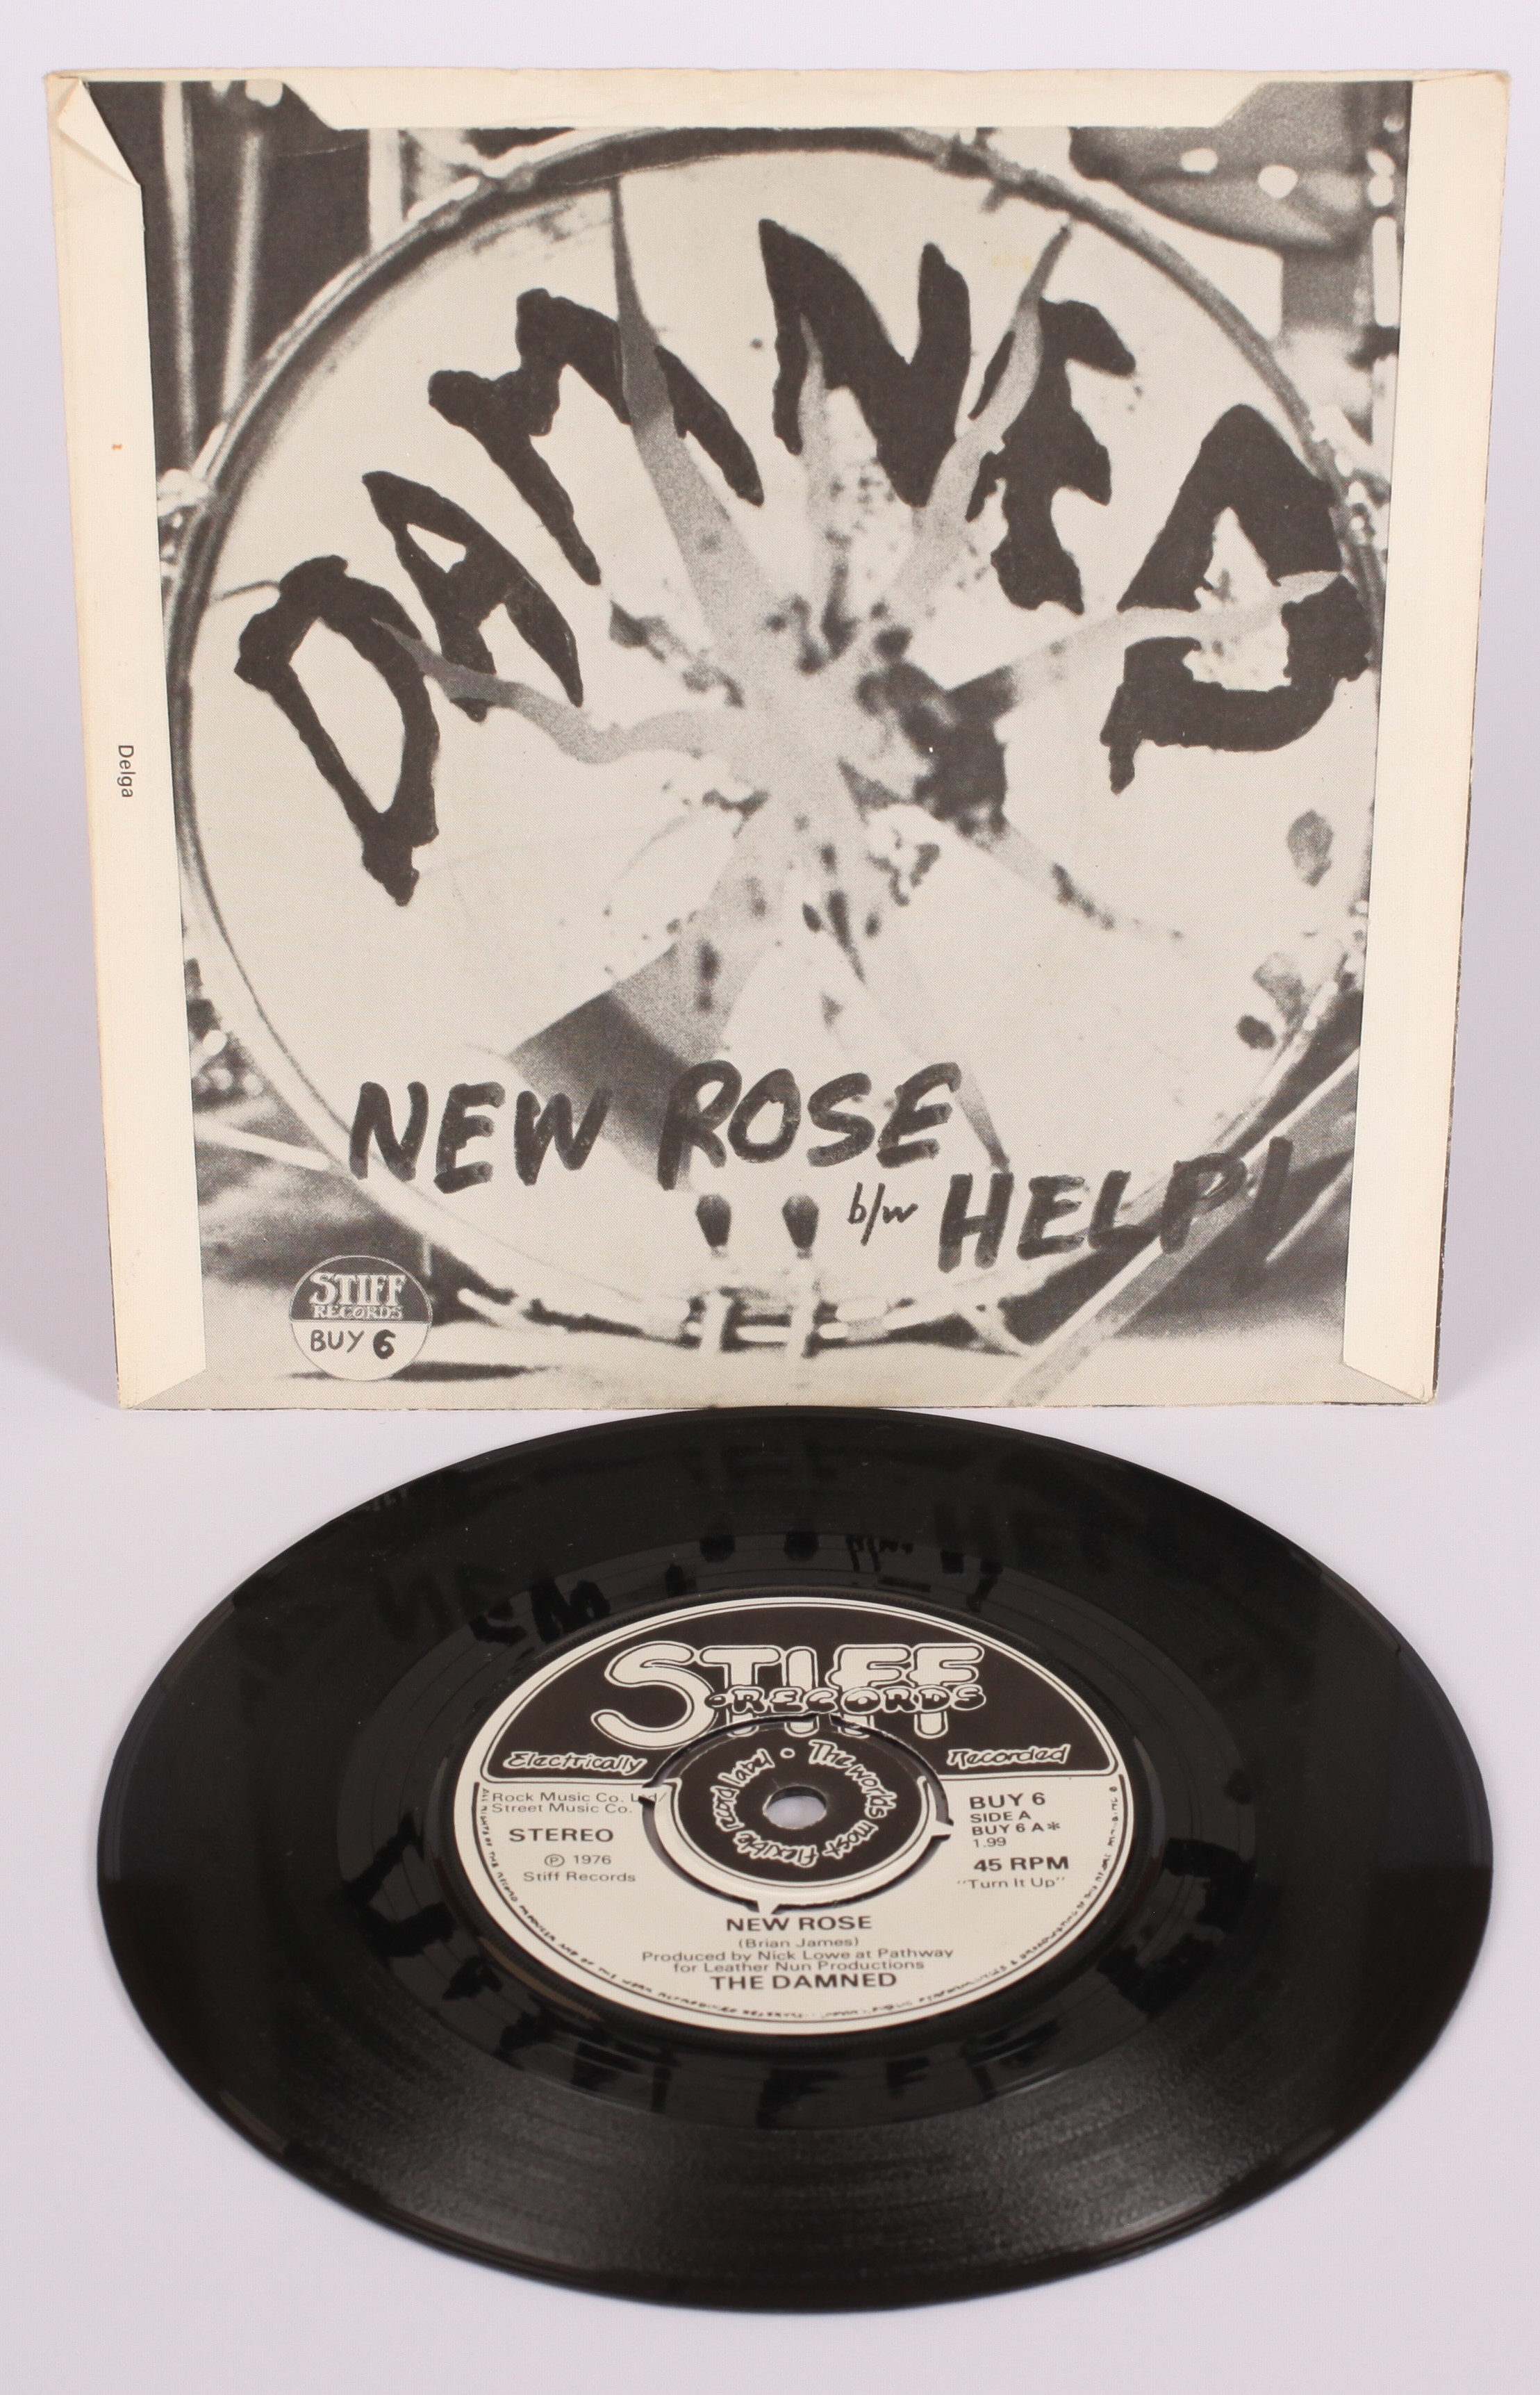 The Damned - New Rose 7" Single - Image 2 of 2